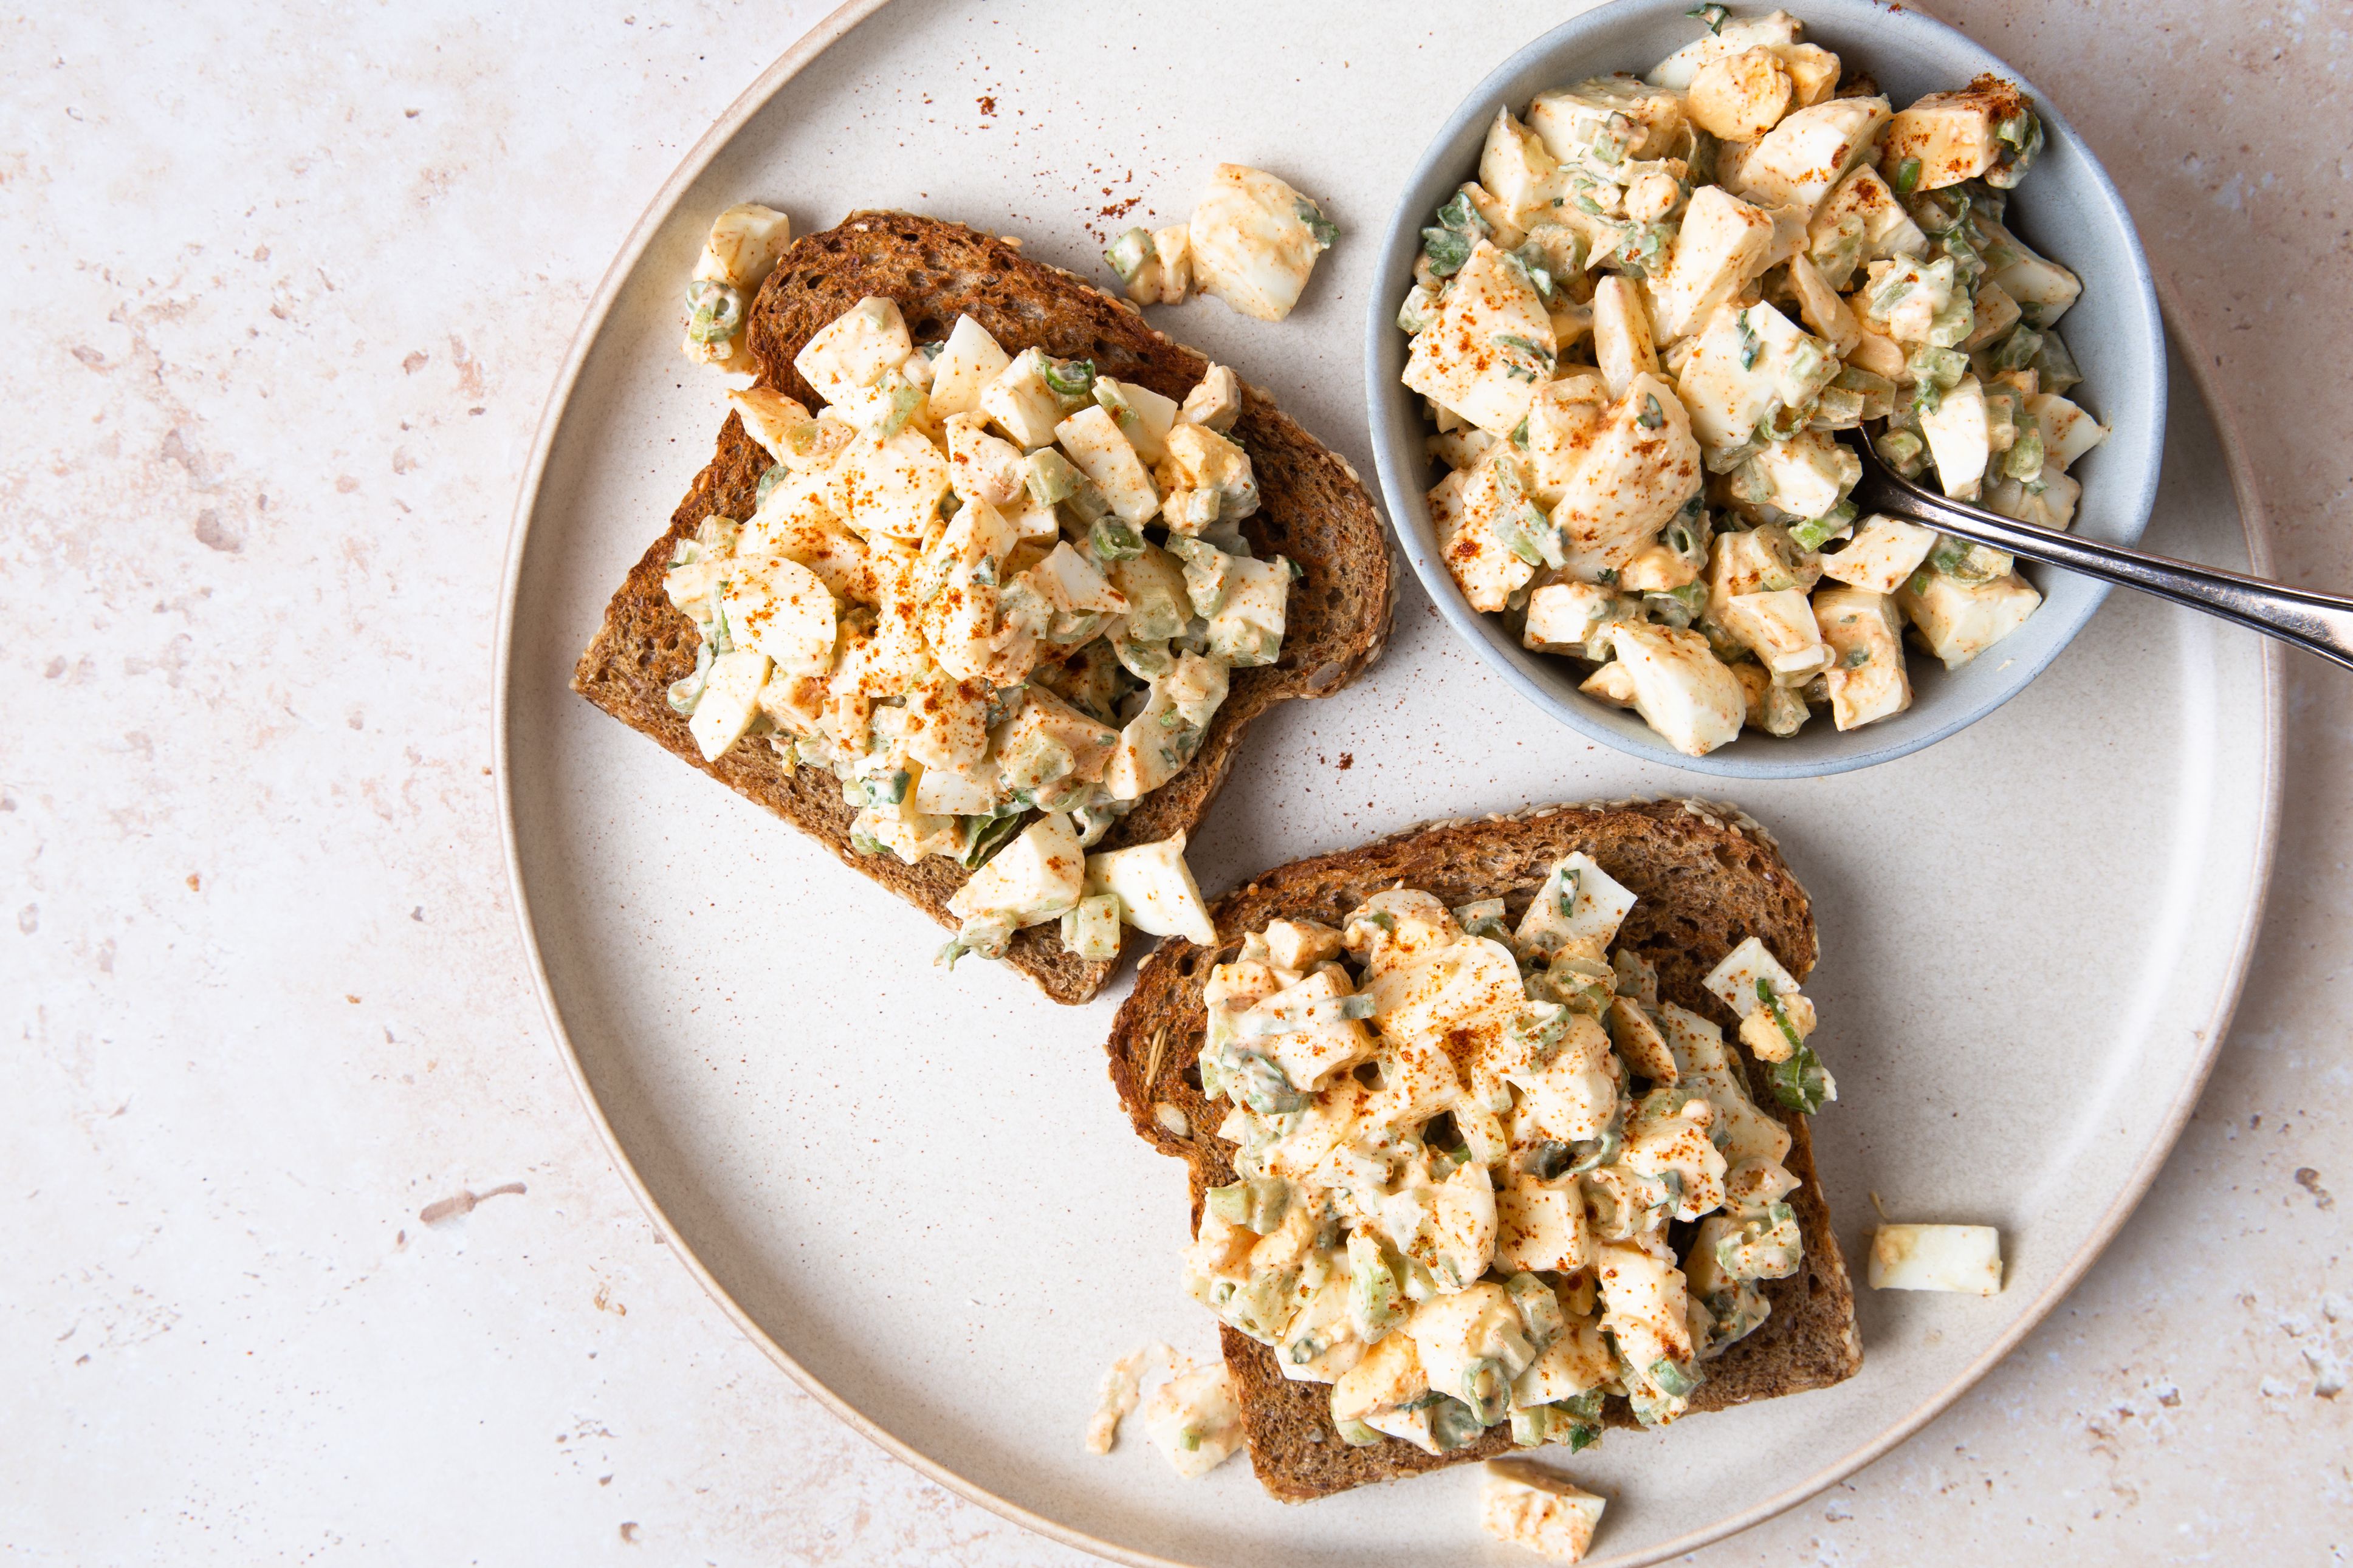 A Creamy Egg Salad That Skips the Mayo